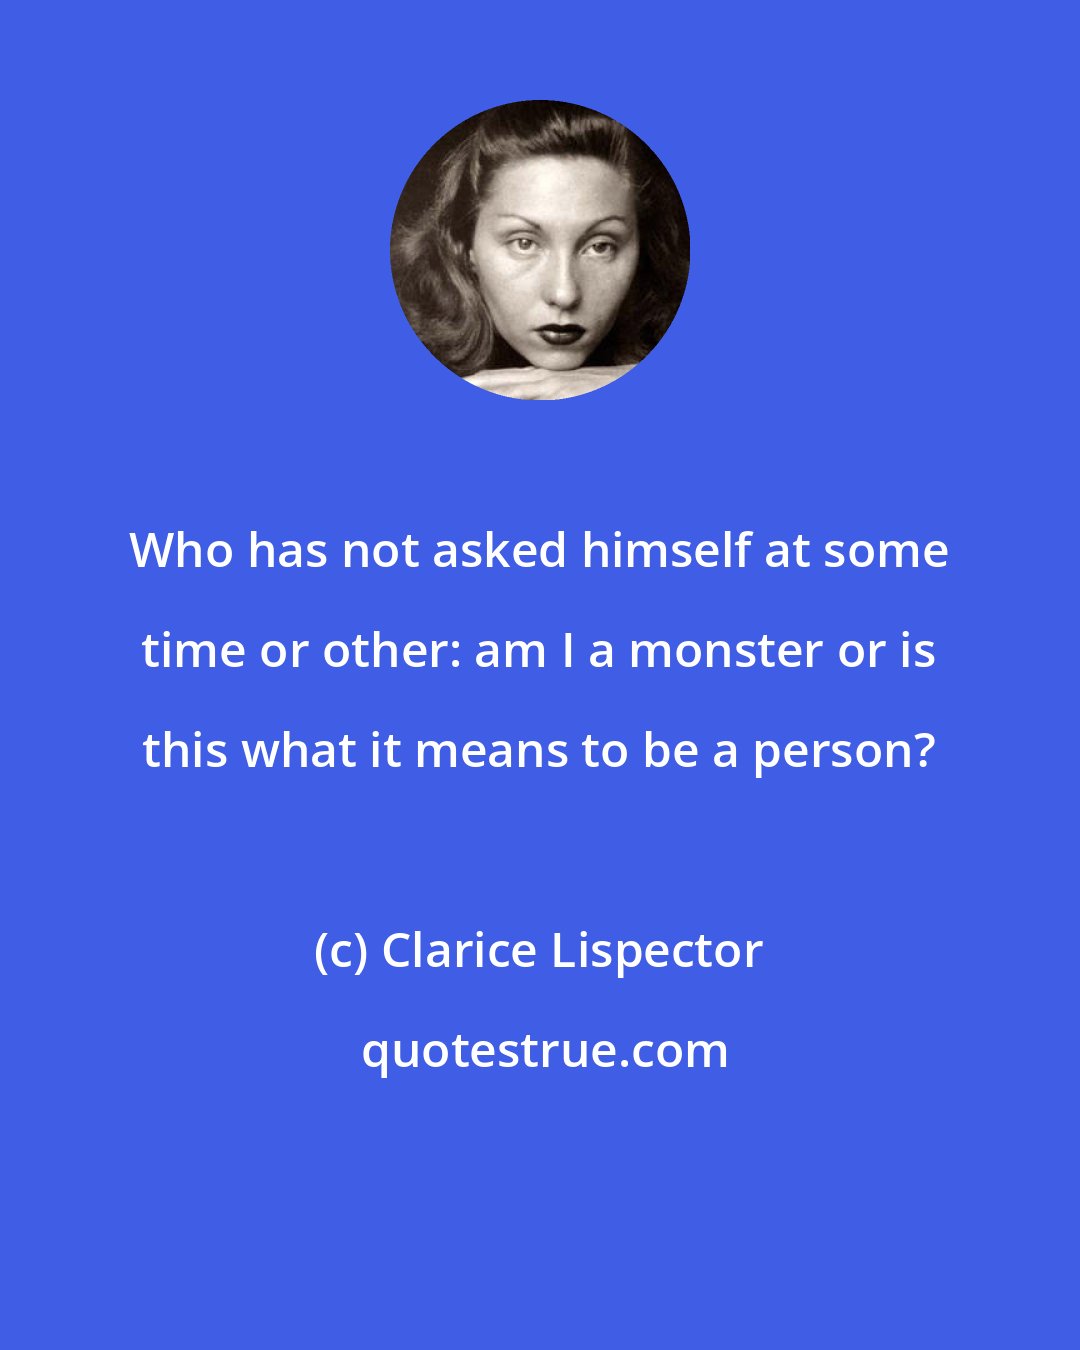 Clarice Lispector: Who has not asked himself at some time or other: am I a monster or is this what it means to be a person?